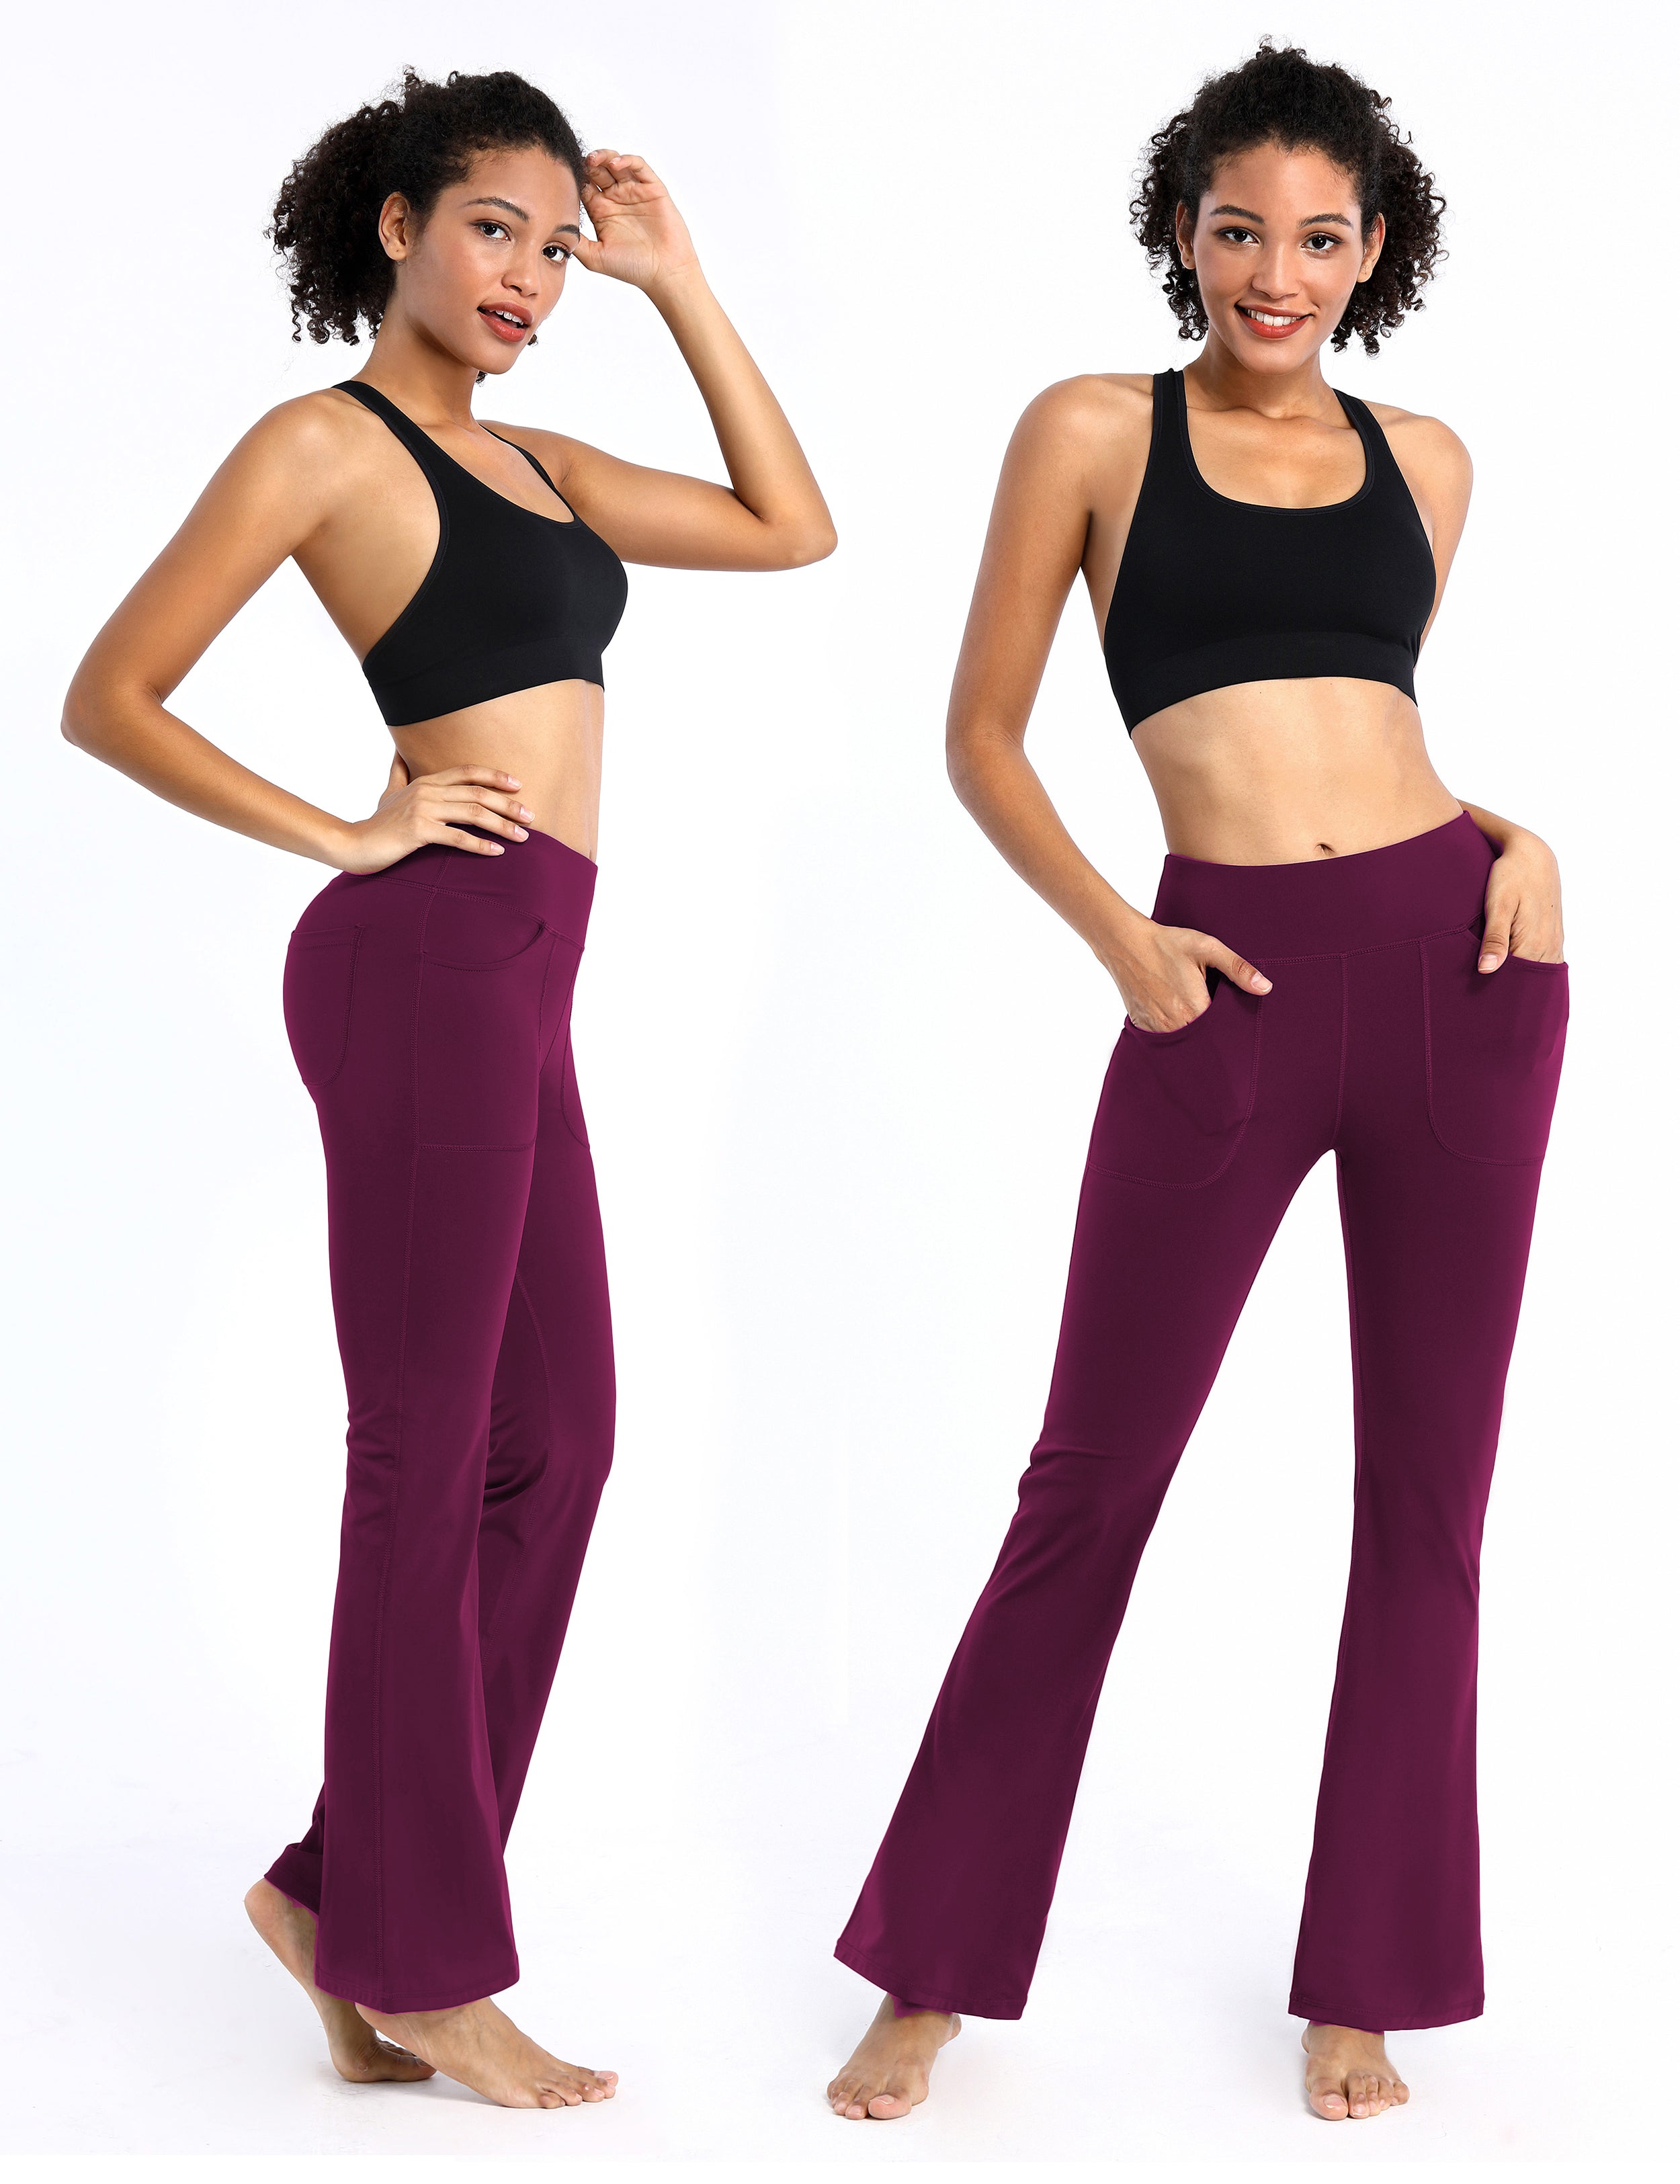 4 Pockets Bootcut Leggings grapevine 75%Nylon/25%Spandex Fabric doesn't attract lint easily 4-way stretch No see-through Moisture-wicking Inner pocket Four lengths